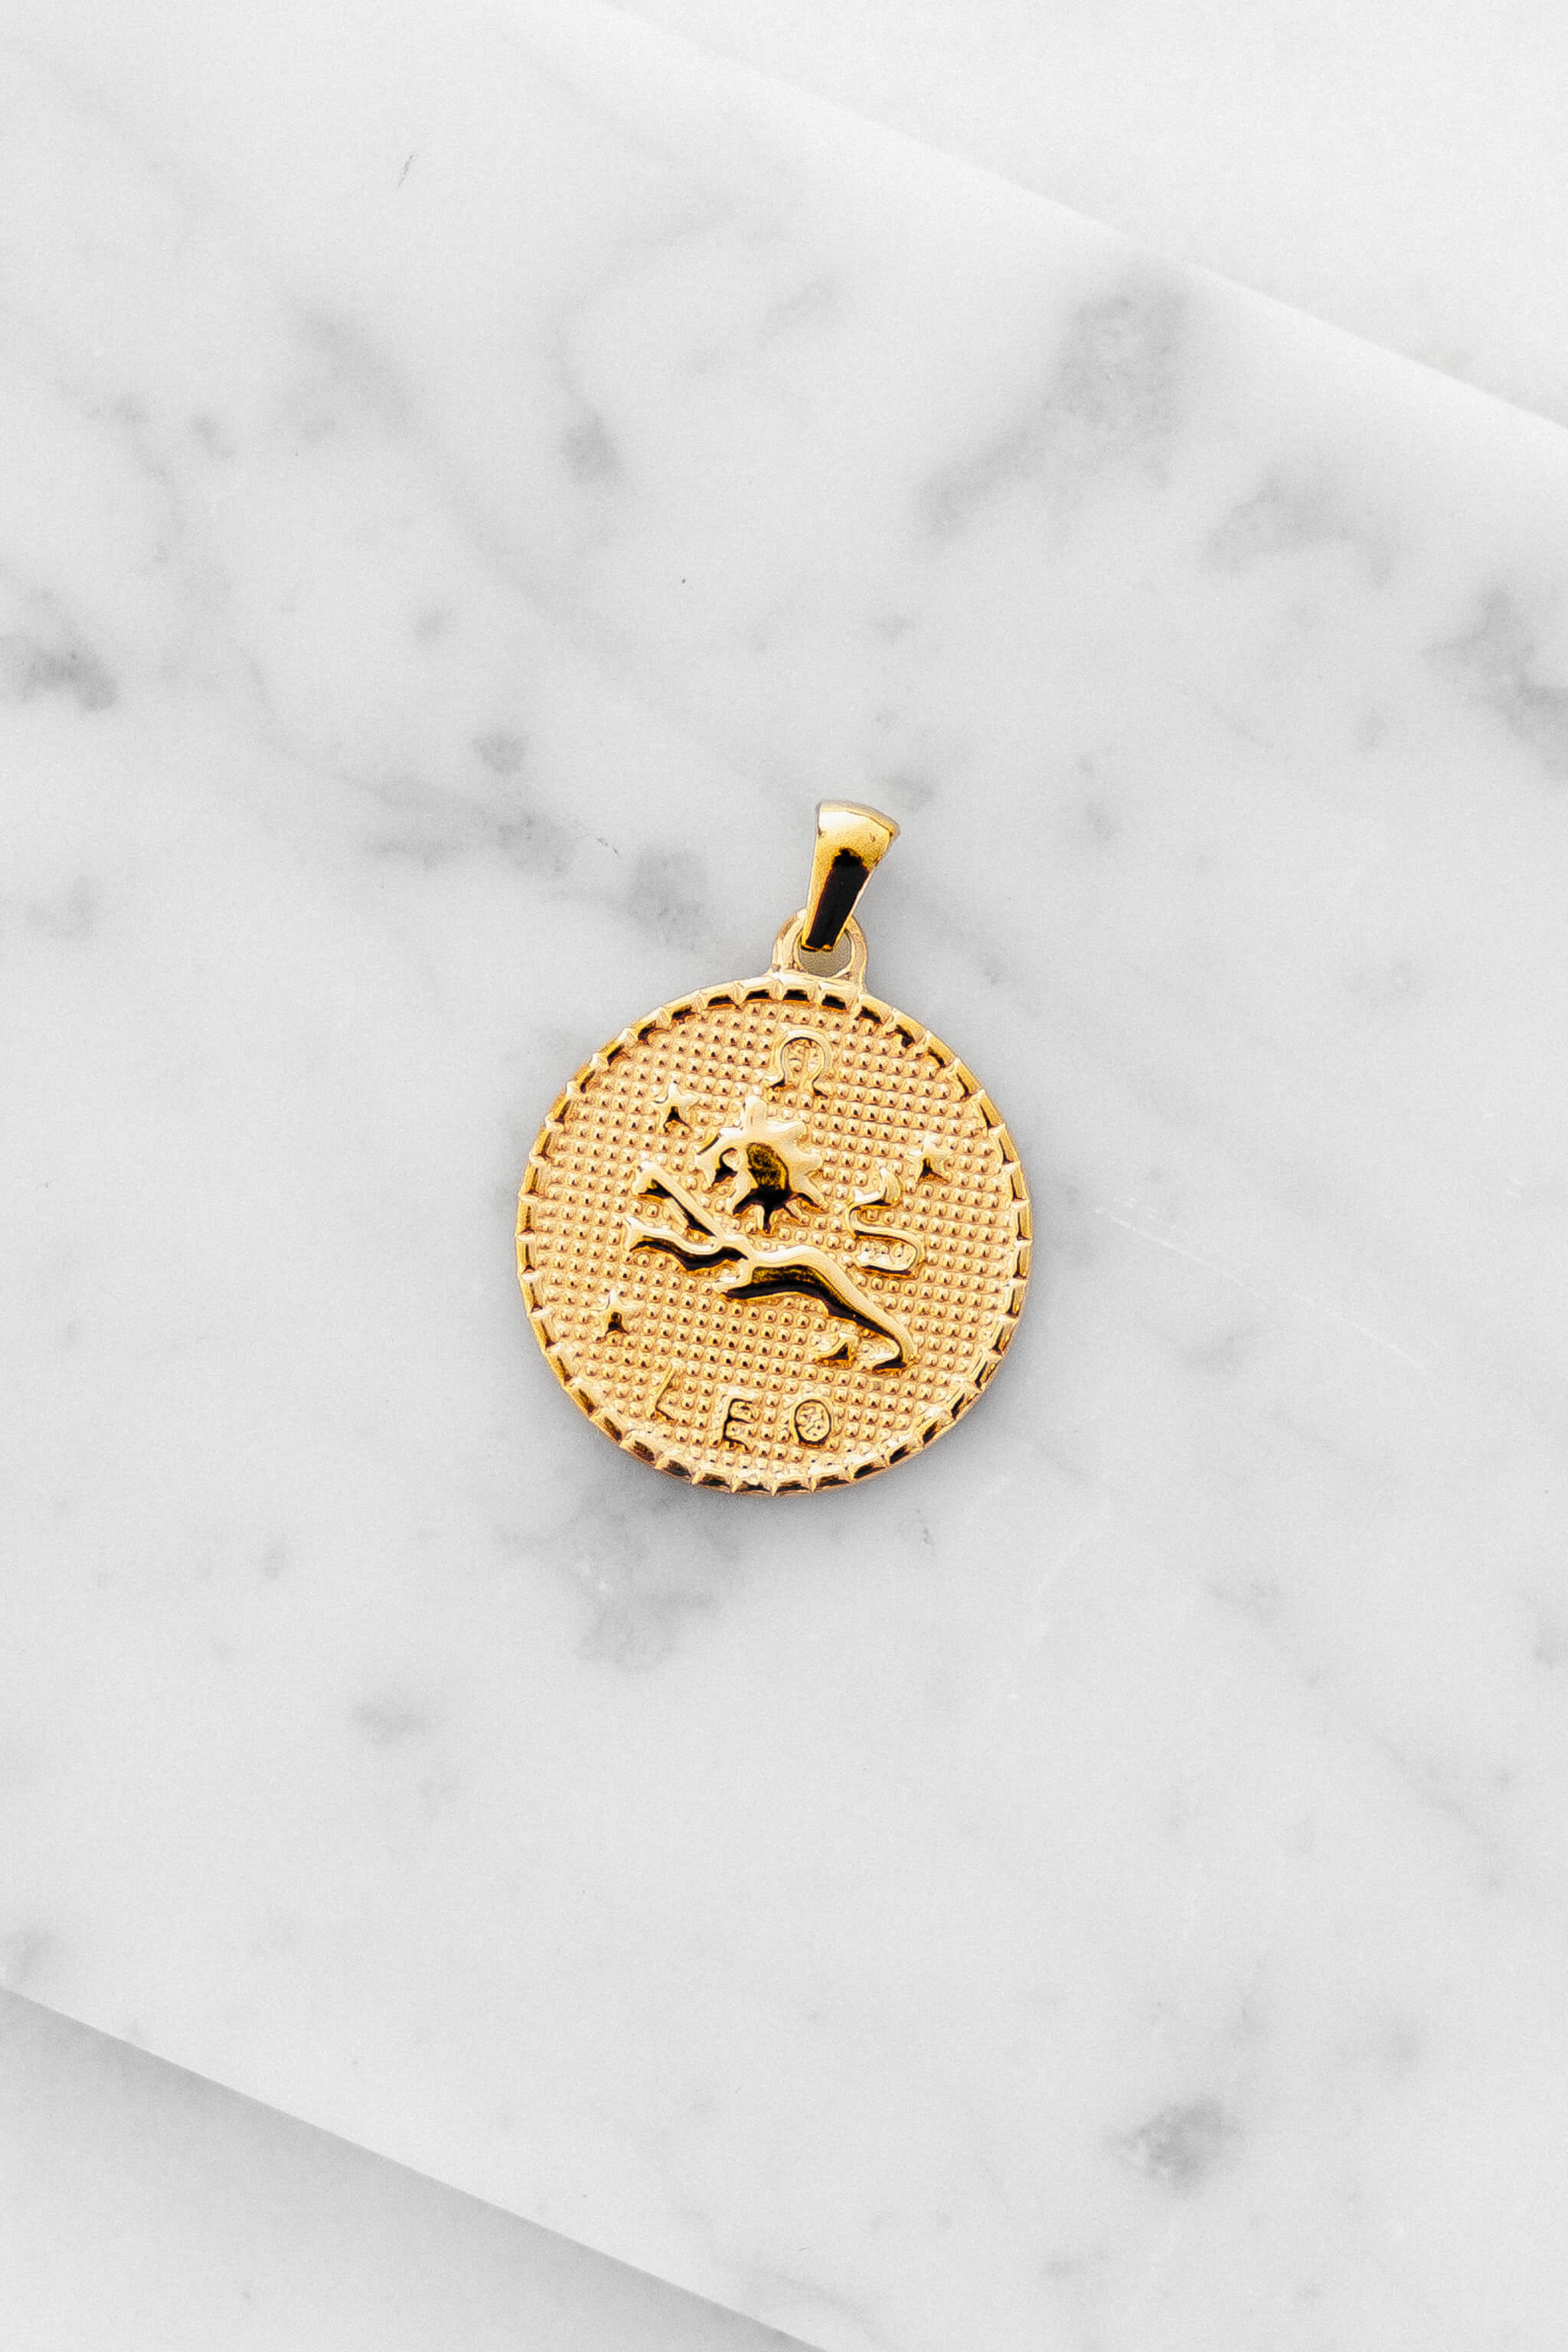 Leo zodiac sign gold coin charm laying on a white marble